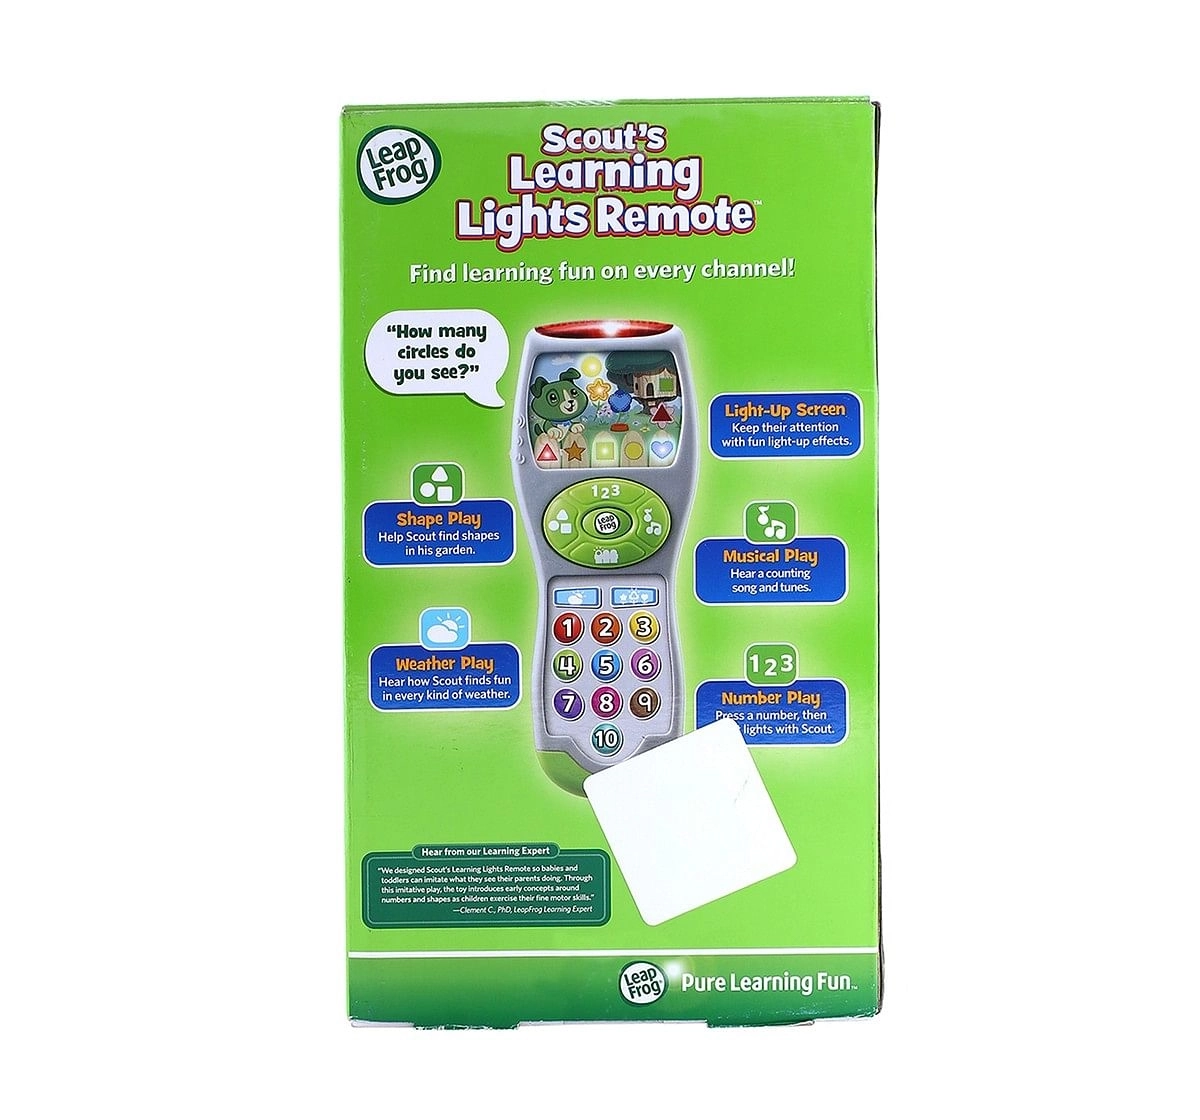  Leapfrog Light Up Remote, Green Learning Toys for Kids age 6M+ 